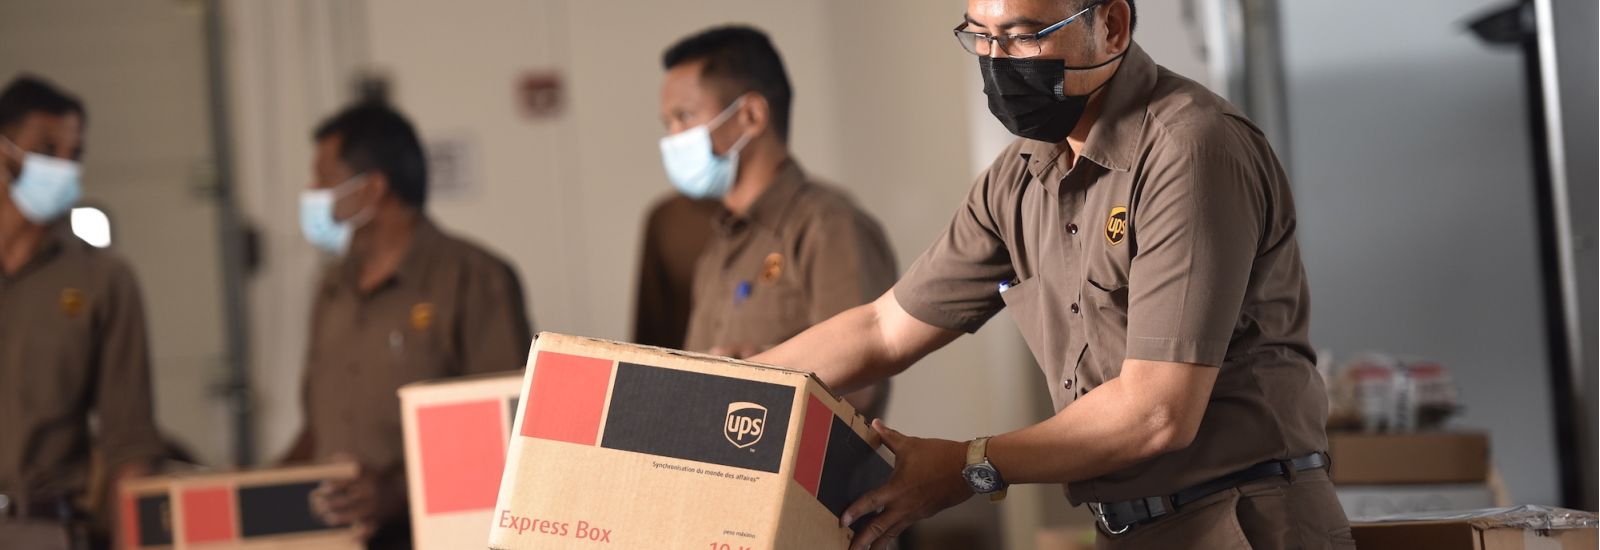 UPS packaging facility, workers in brown uniforms with masks handling packages